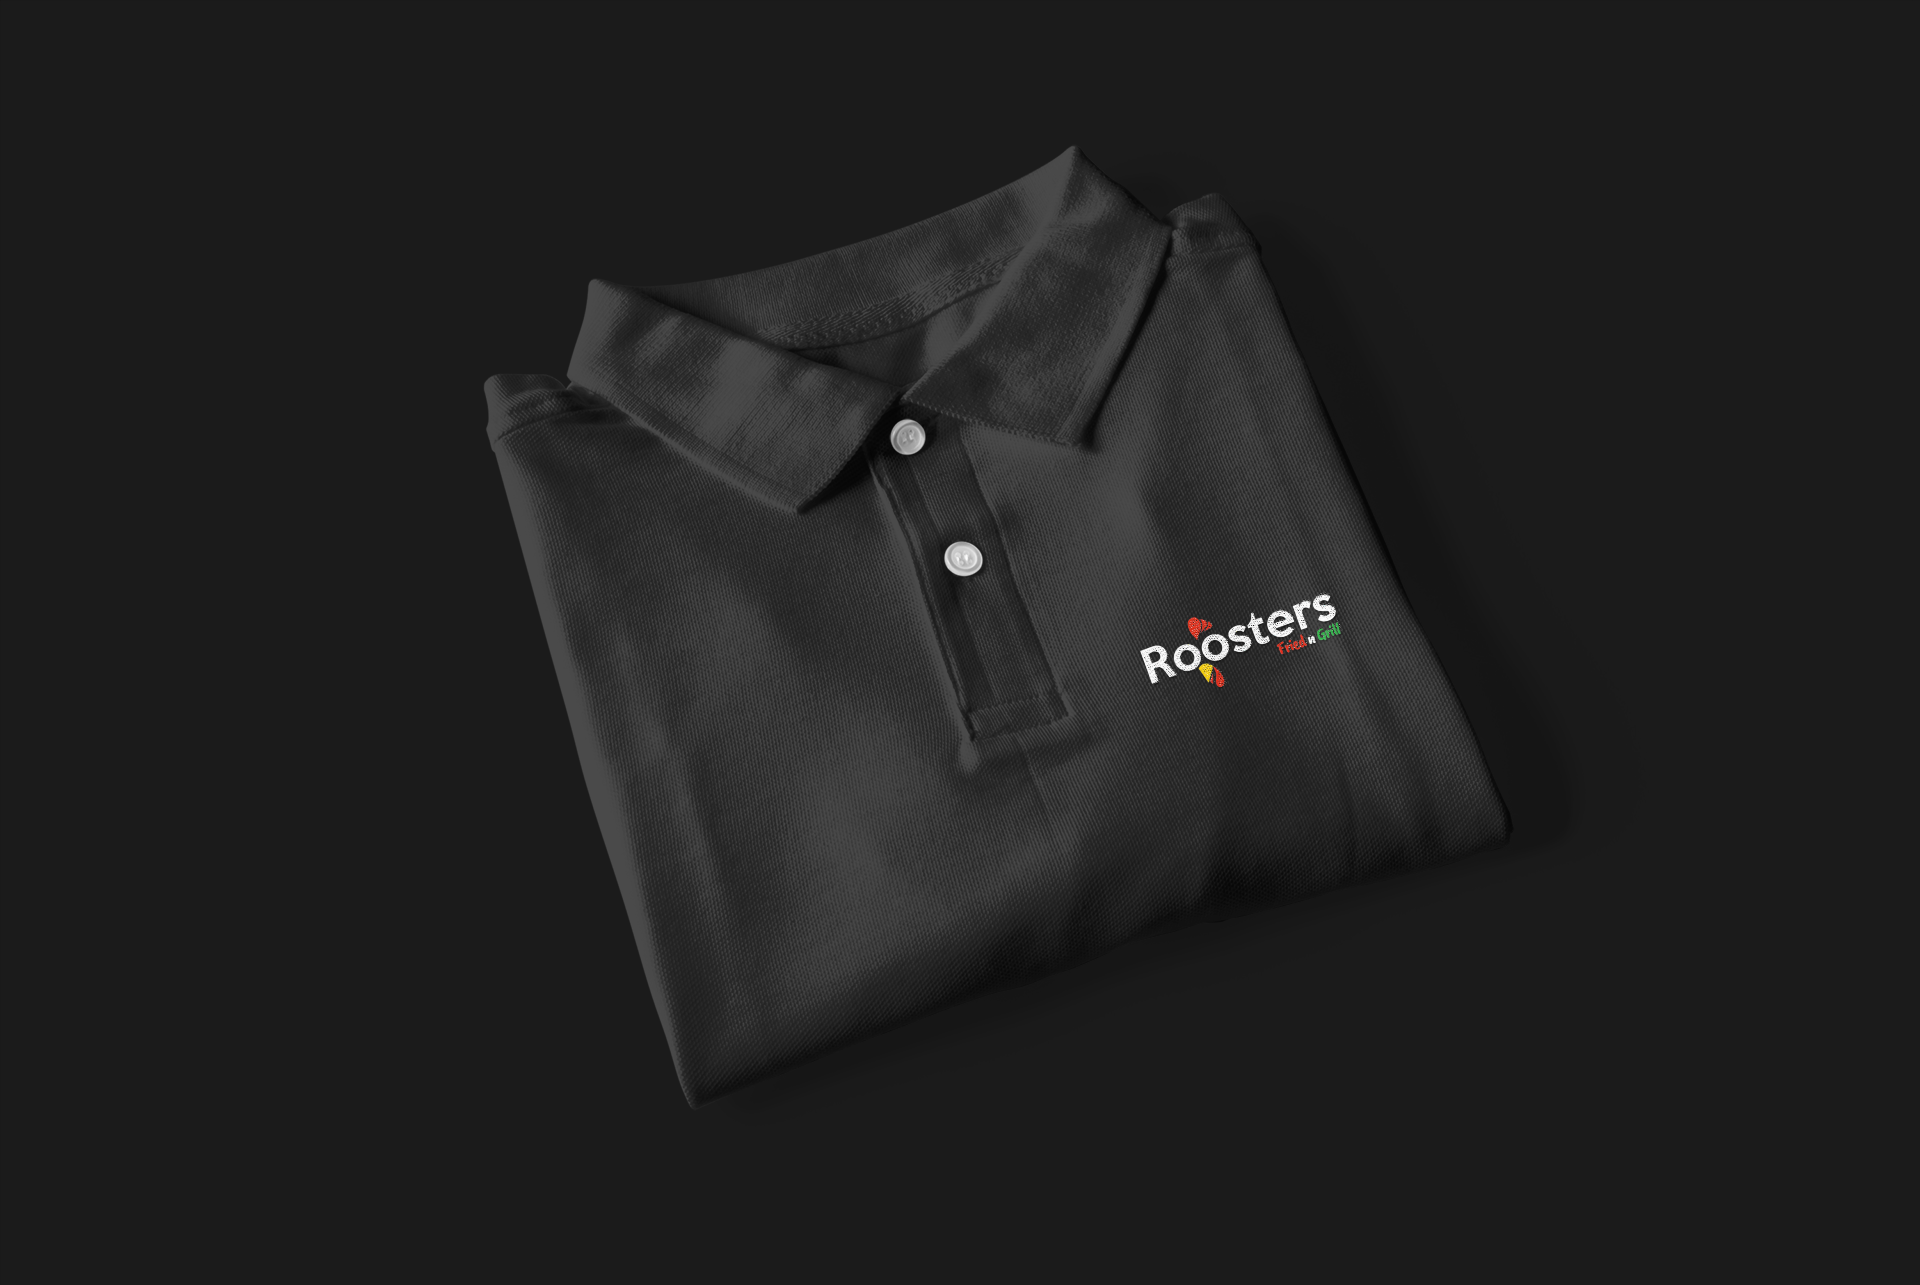 Black Roosters Fried n Grill polo t-shirt folded